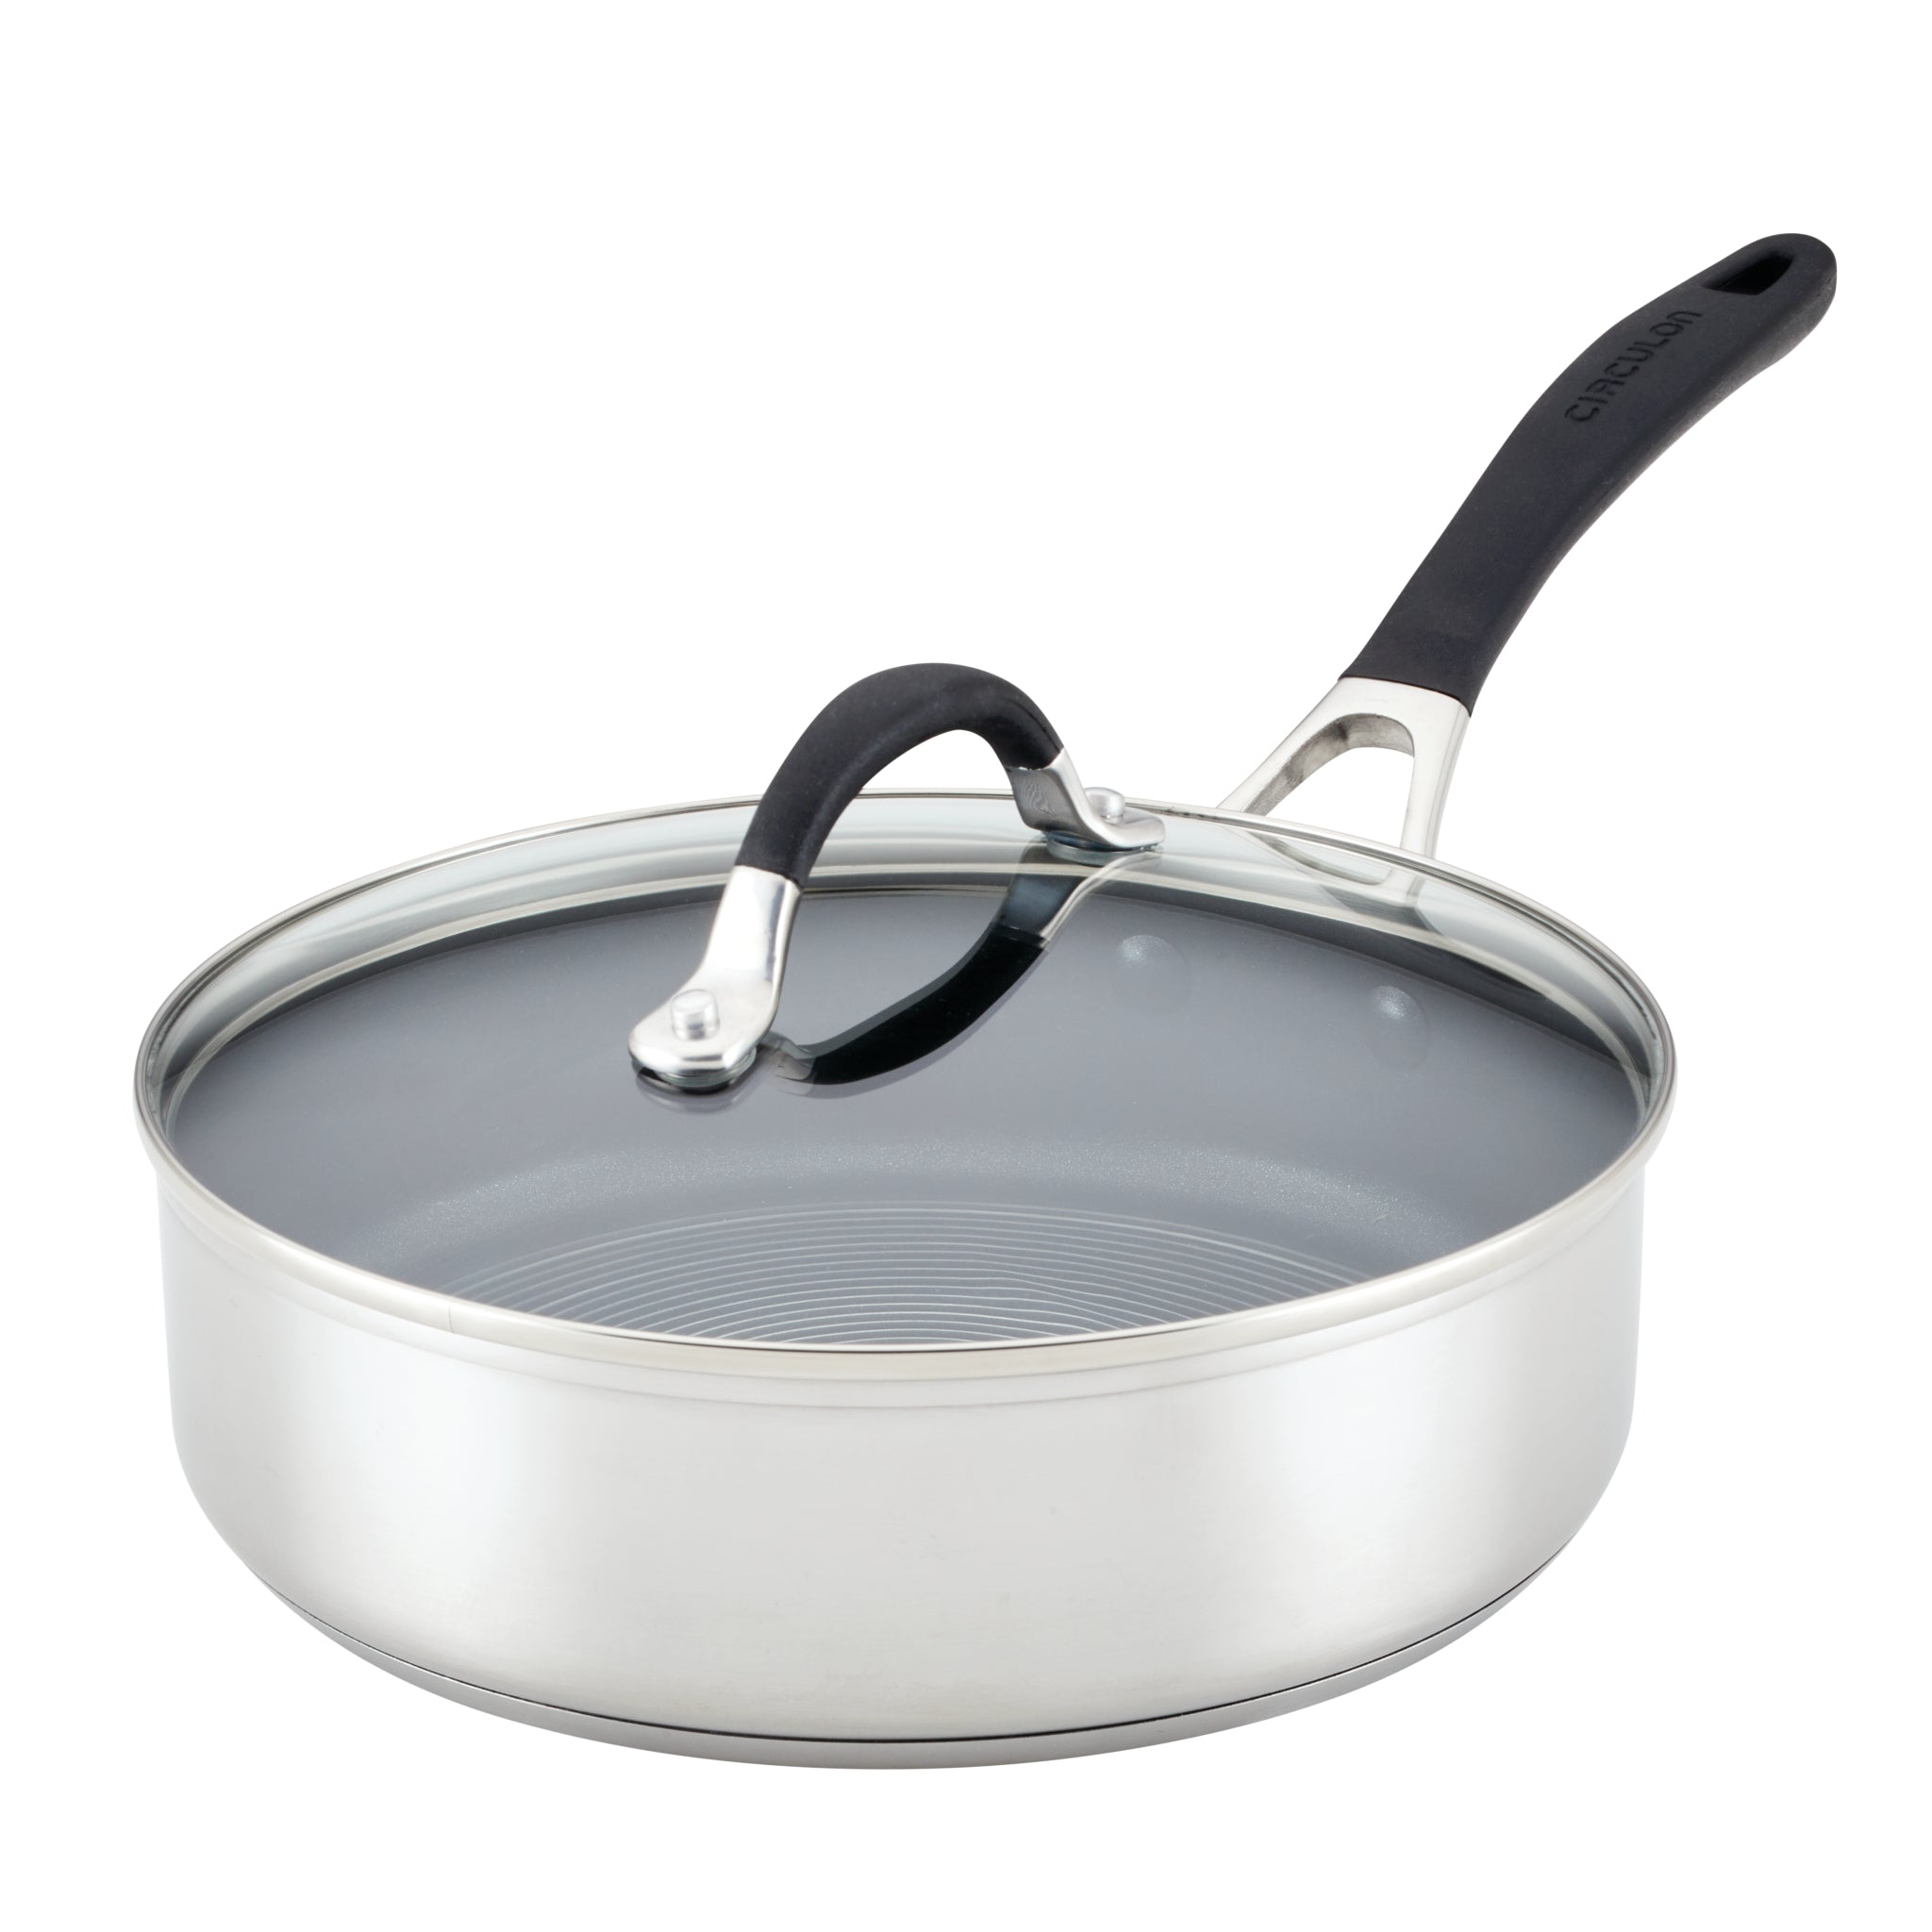 1-Qt Sauté Saucepan Induction Stainless Steel Made in the USA